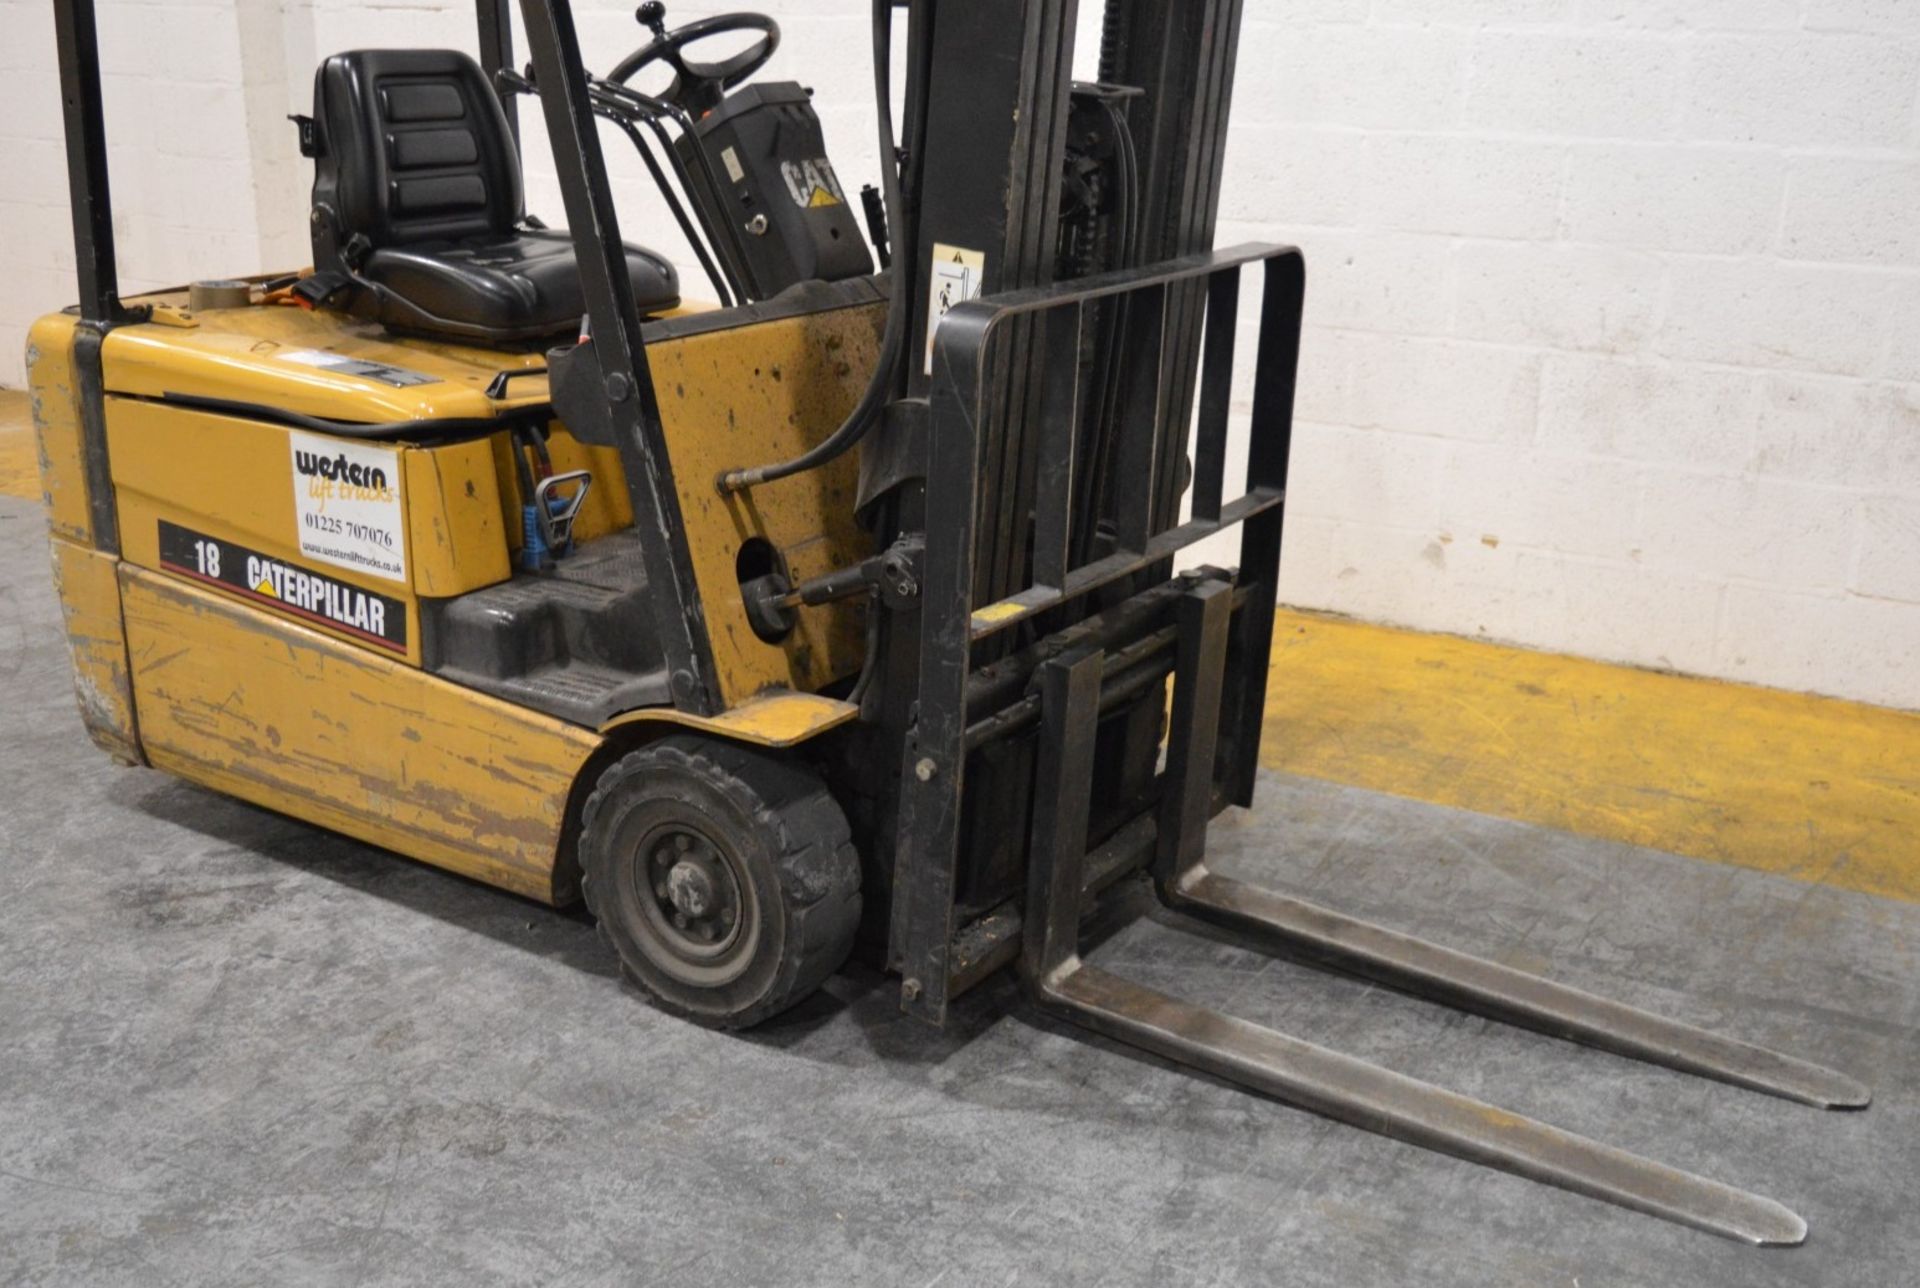 1 x Caterpillar Electric Counter Balance Forklift Truck - Model EP18KT - 1800kg Basic Capacity - - Image 4 of 14